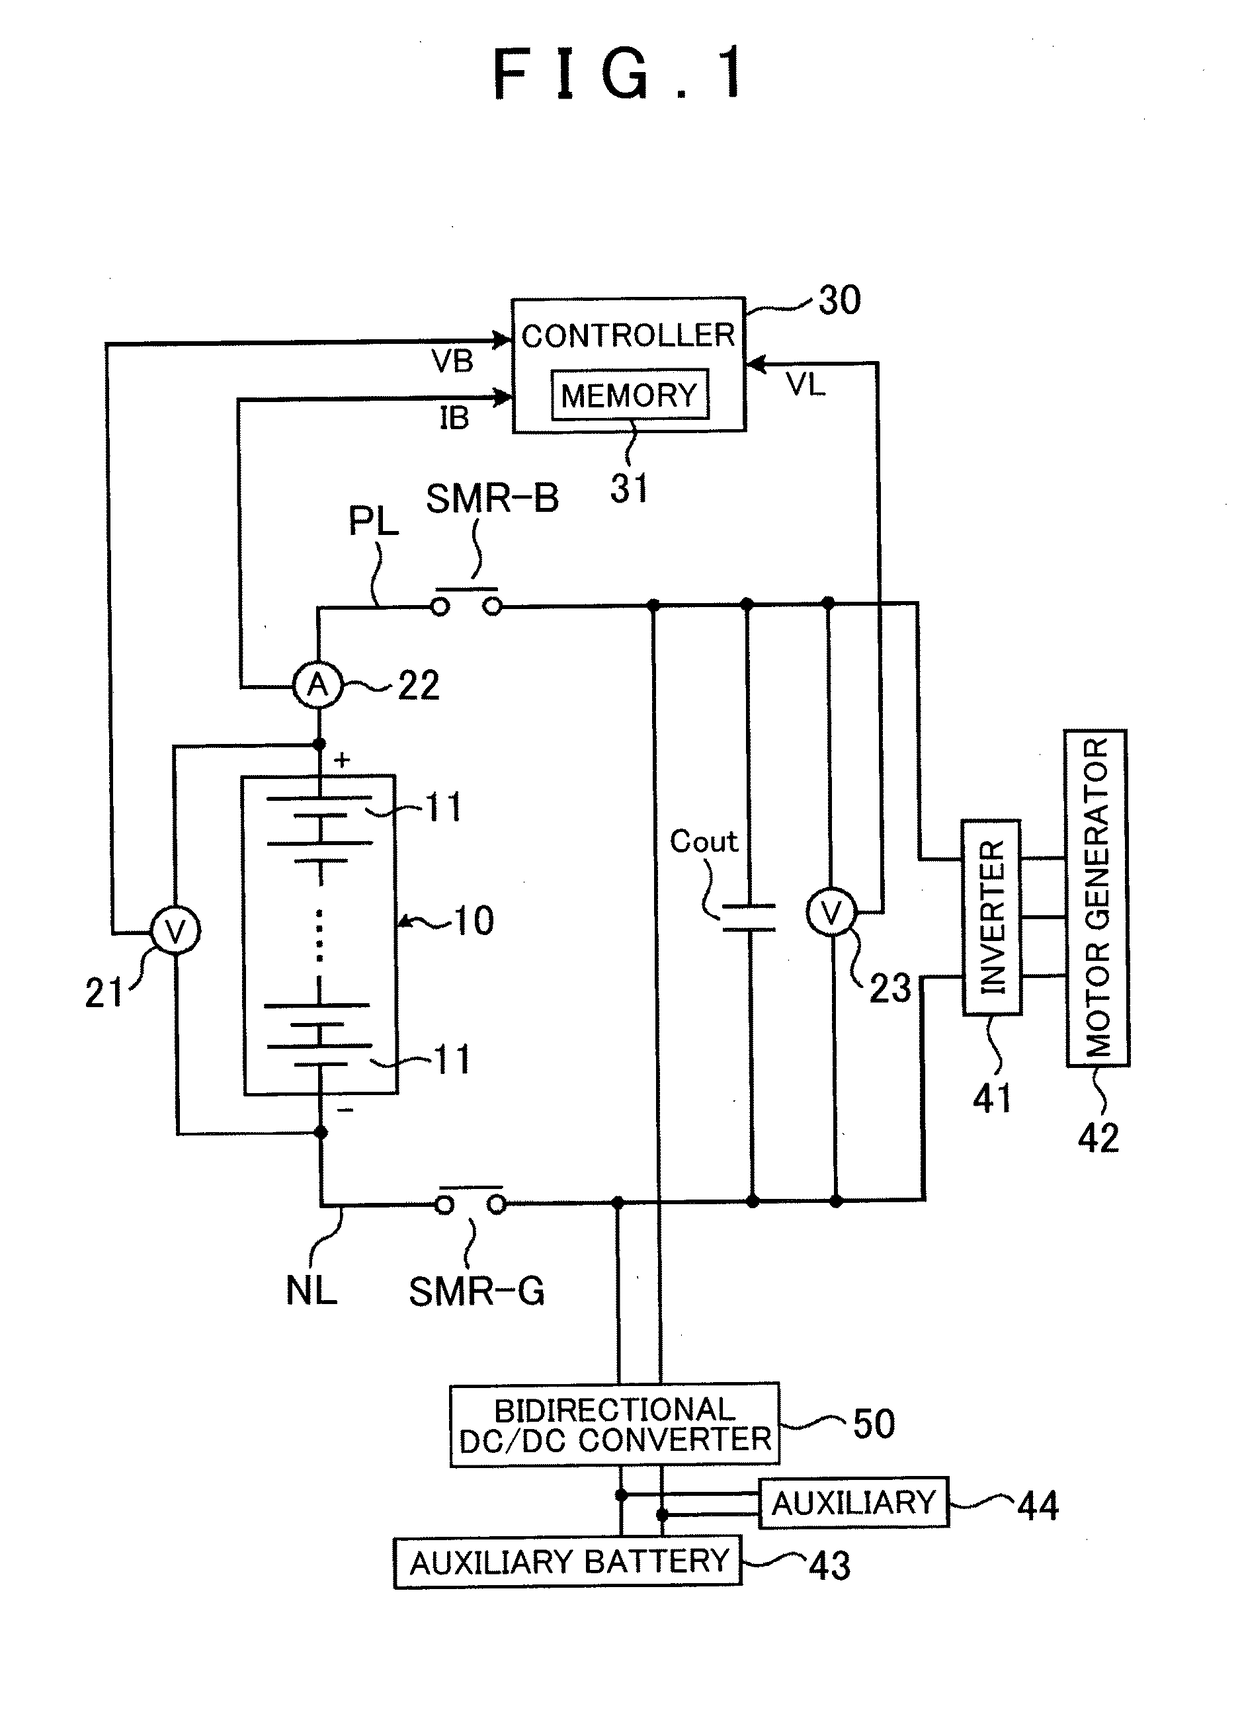 Dc/dc converter and electrical storage system